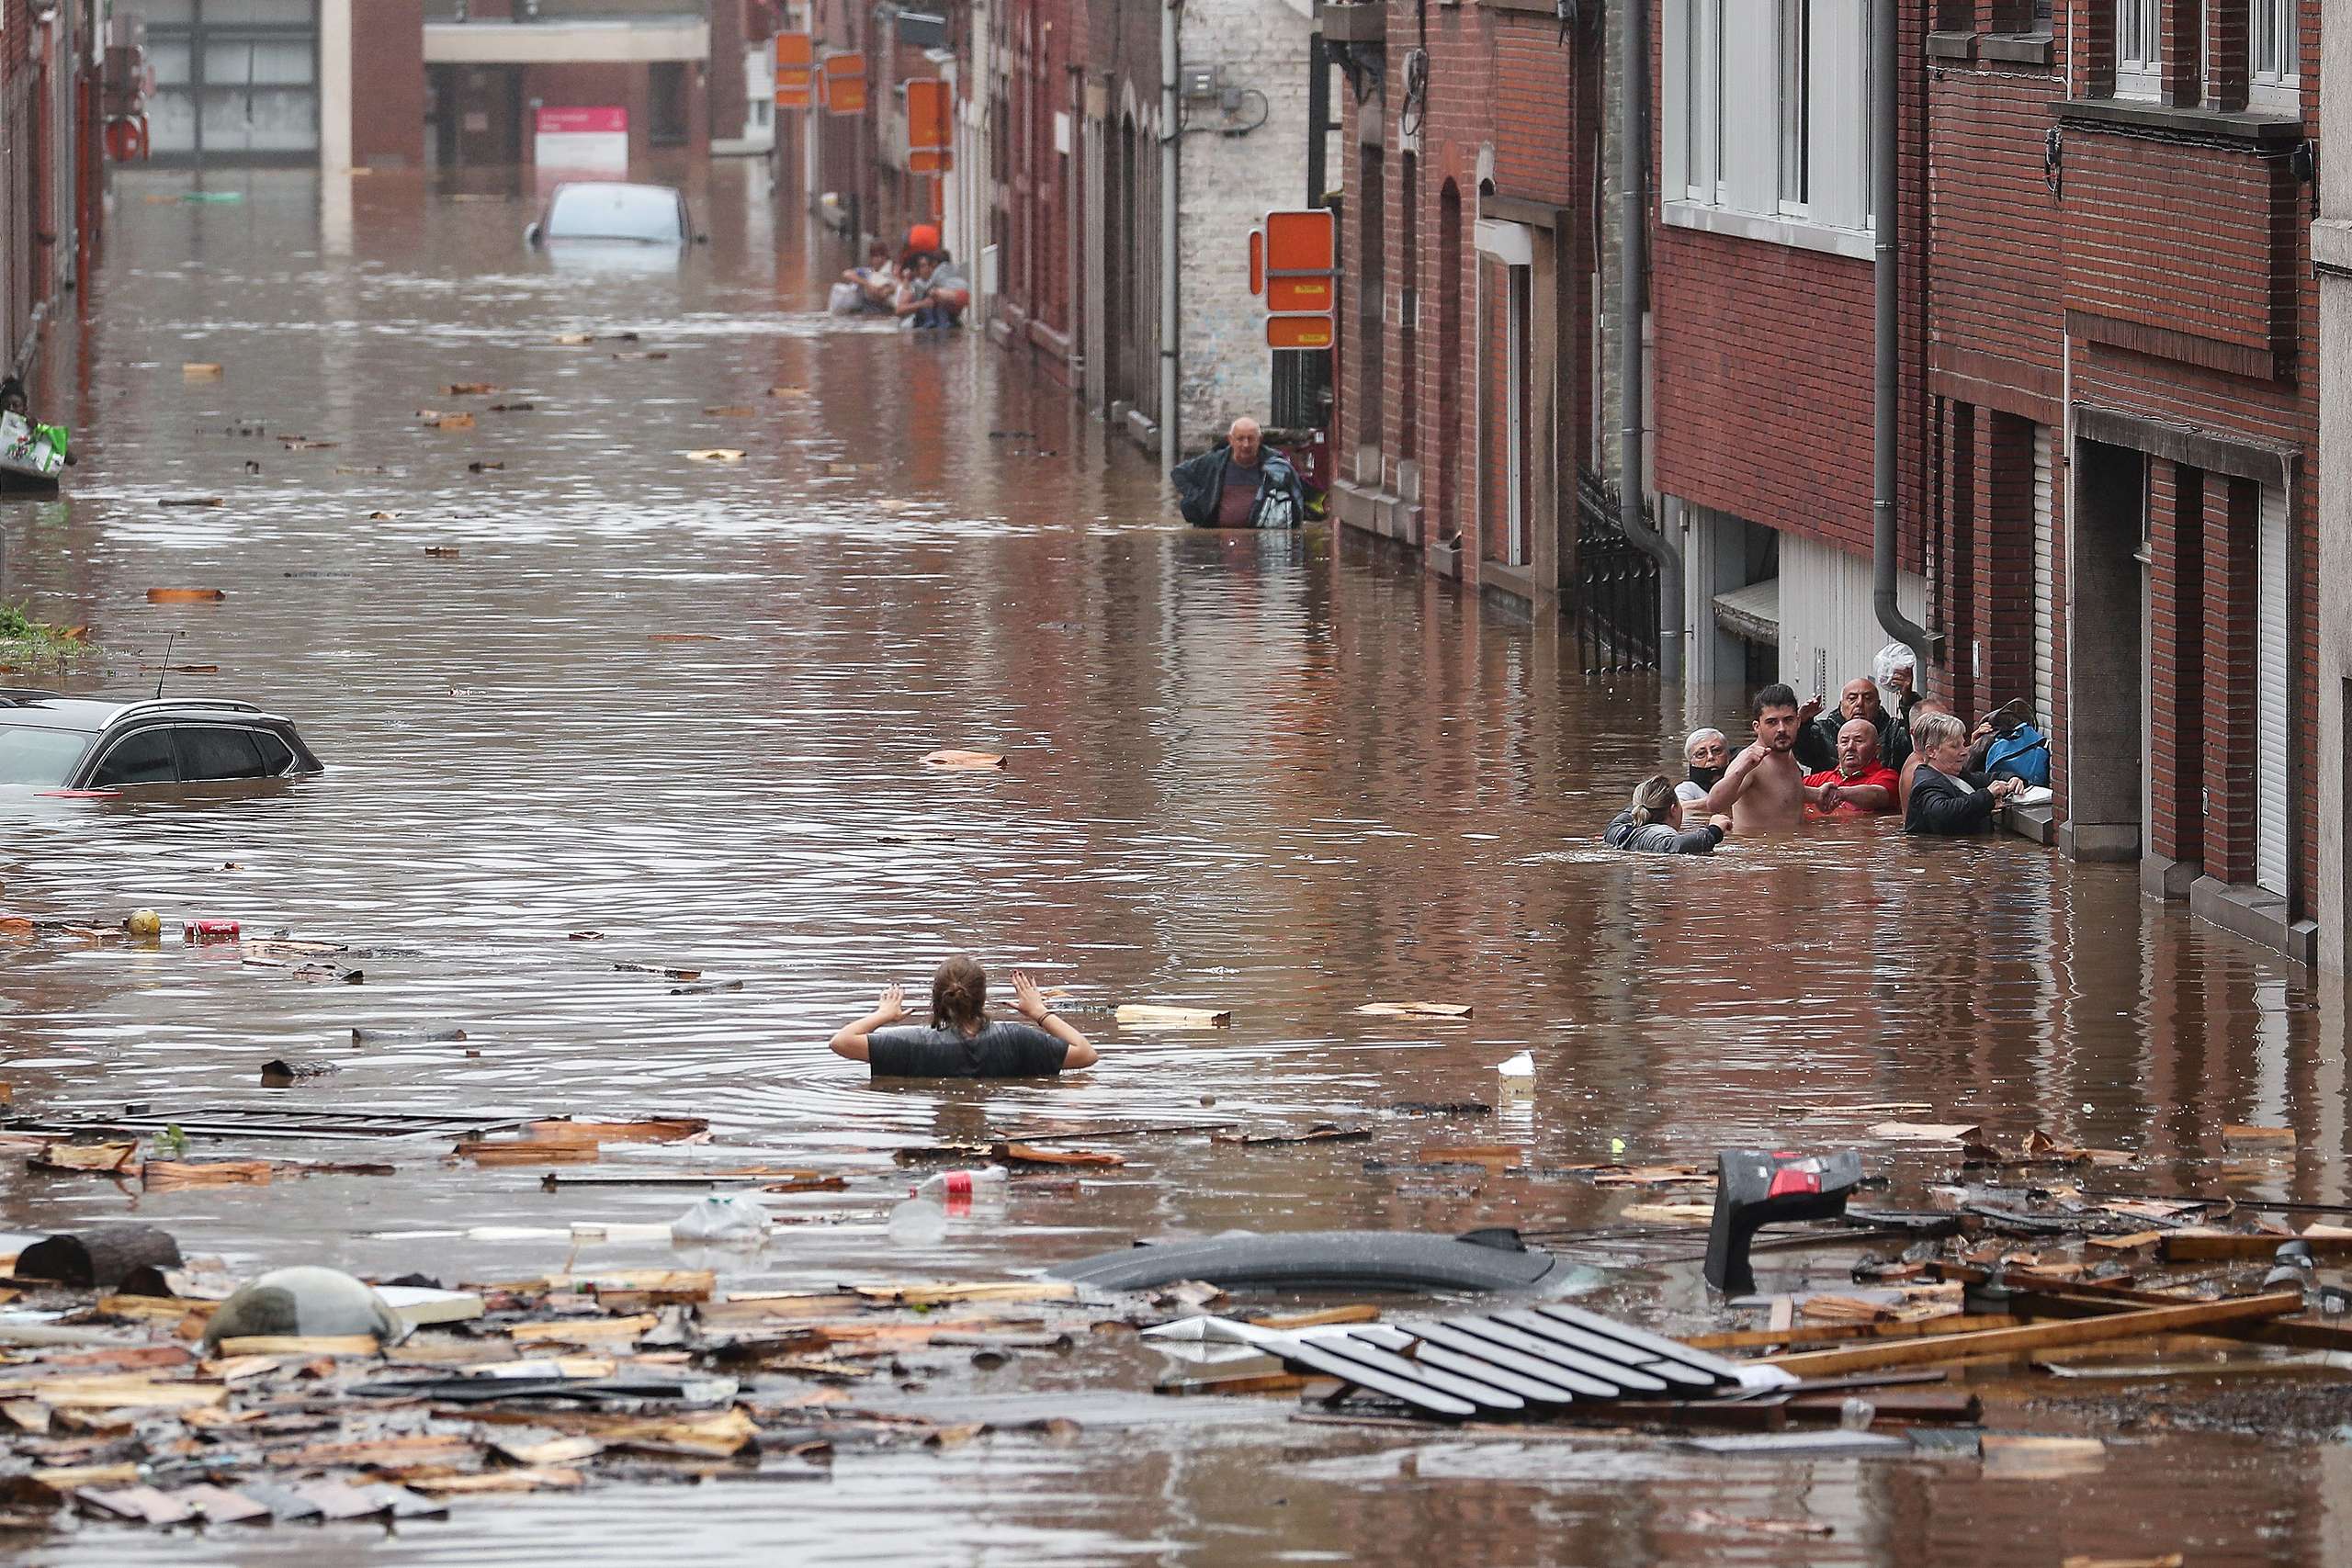 A woman is trying to move in a flooded street following heavy rains in Liege. © Bruno Fahy/Belga/AFP / Getty Images